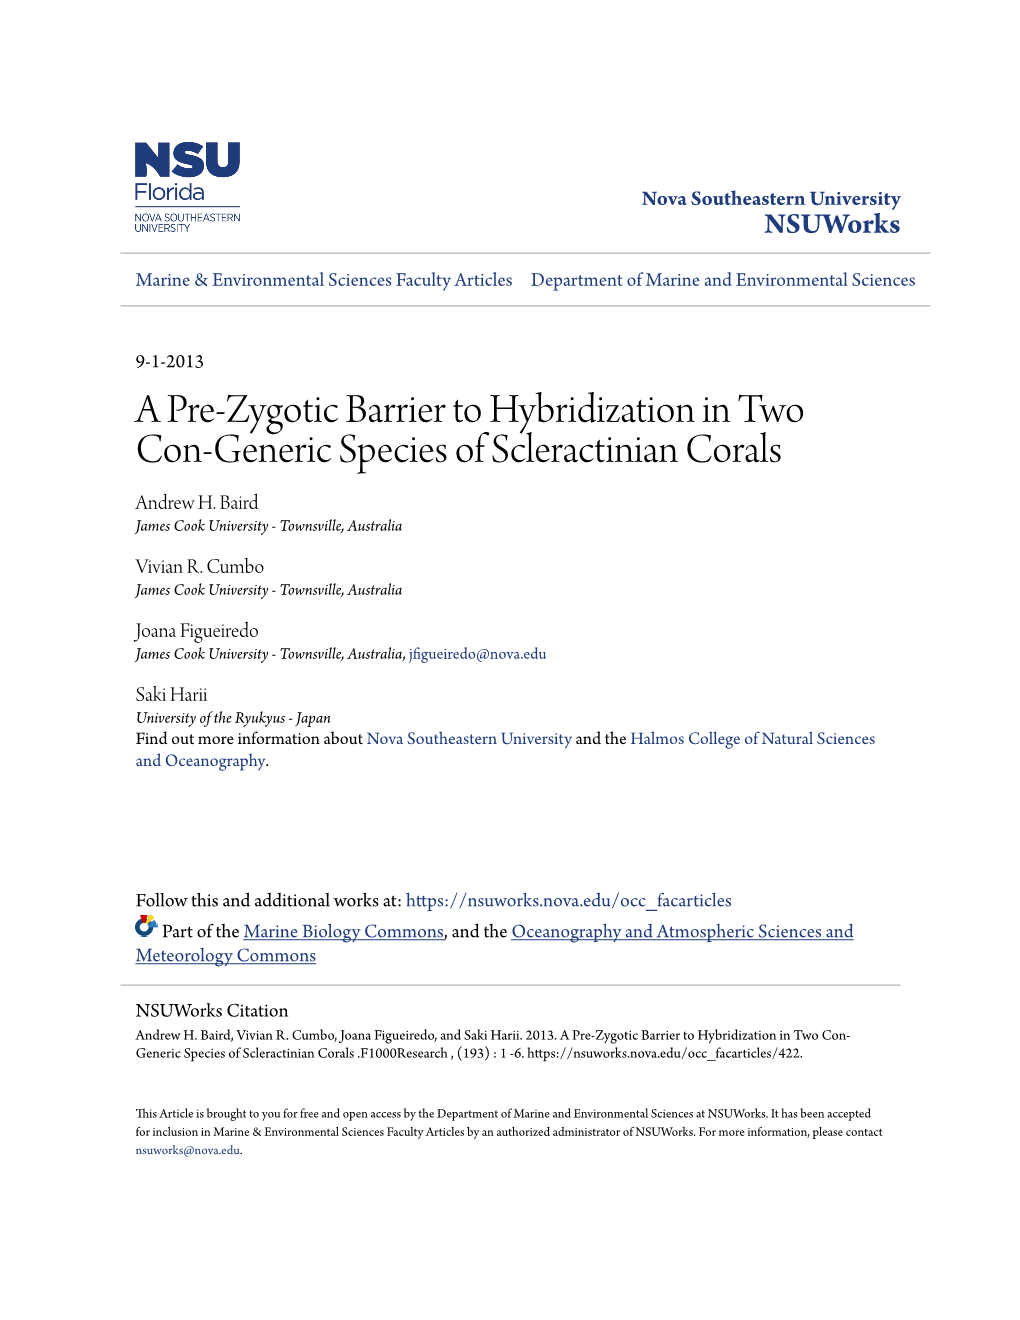 A Pre-Zygotic Barrier to Hybridization in Two Con-Generic Species of Scleractinian Corals Andrew H